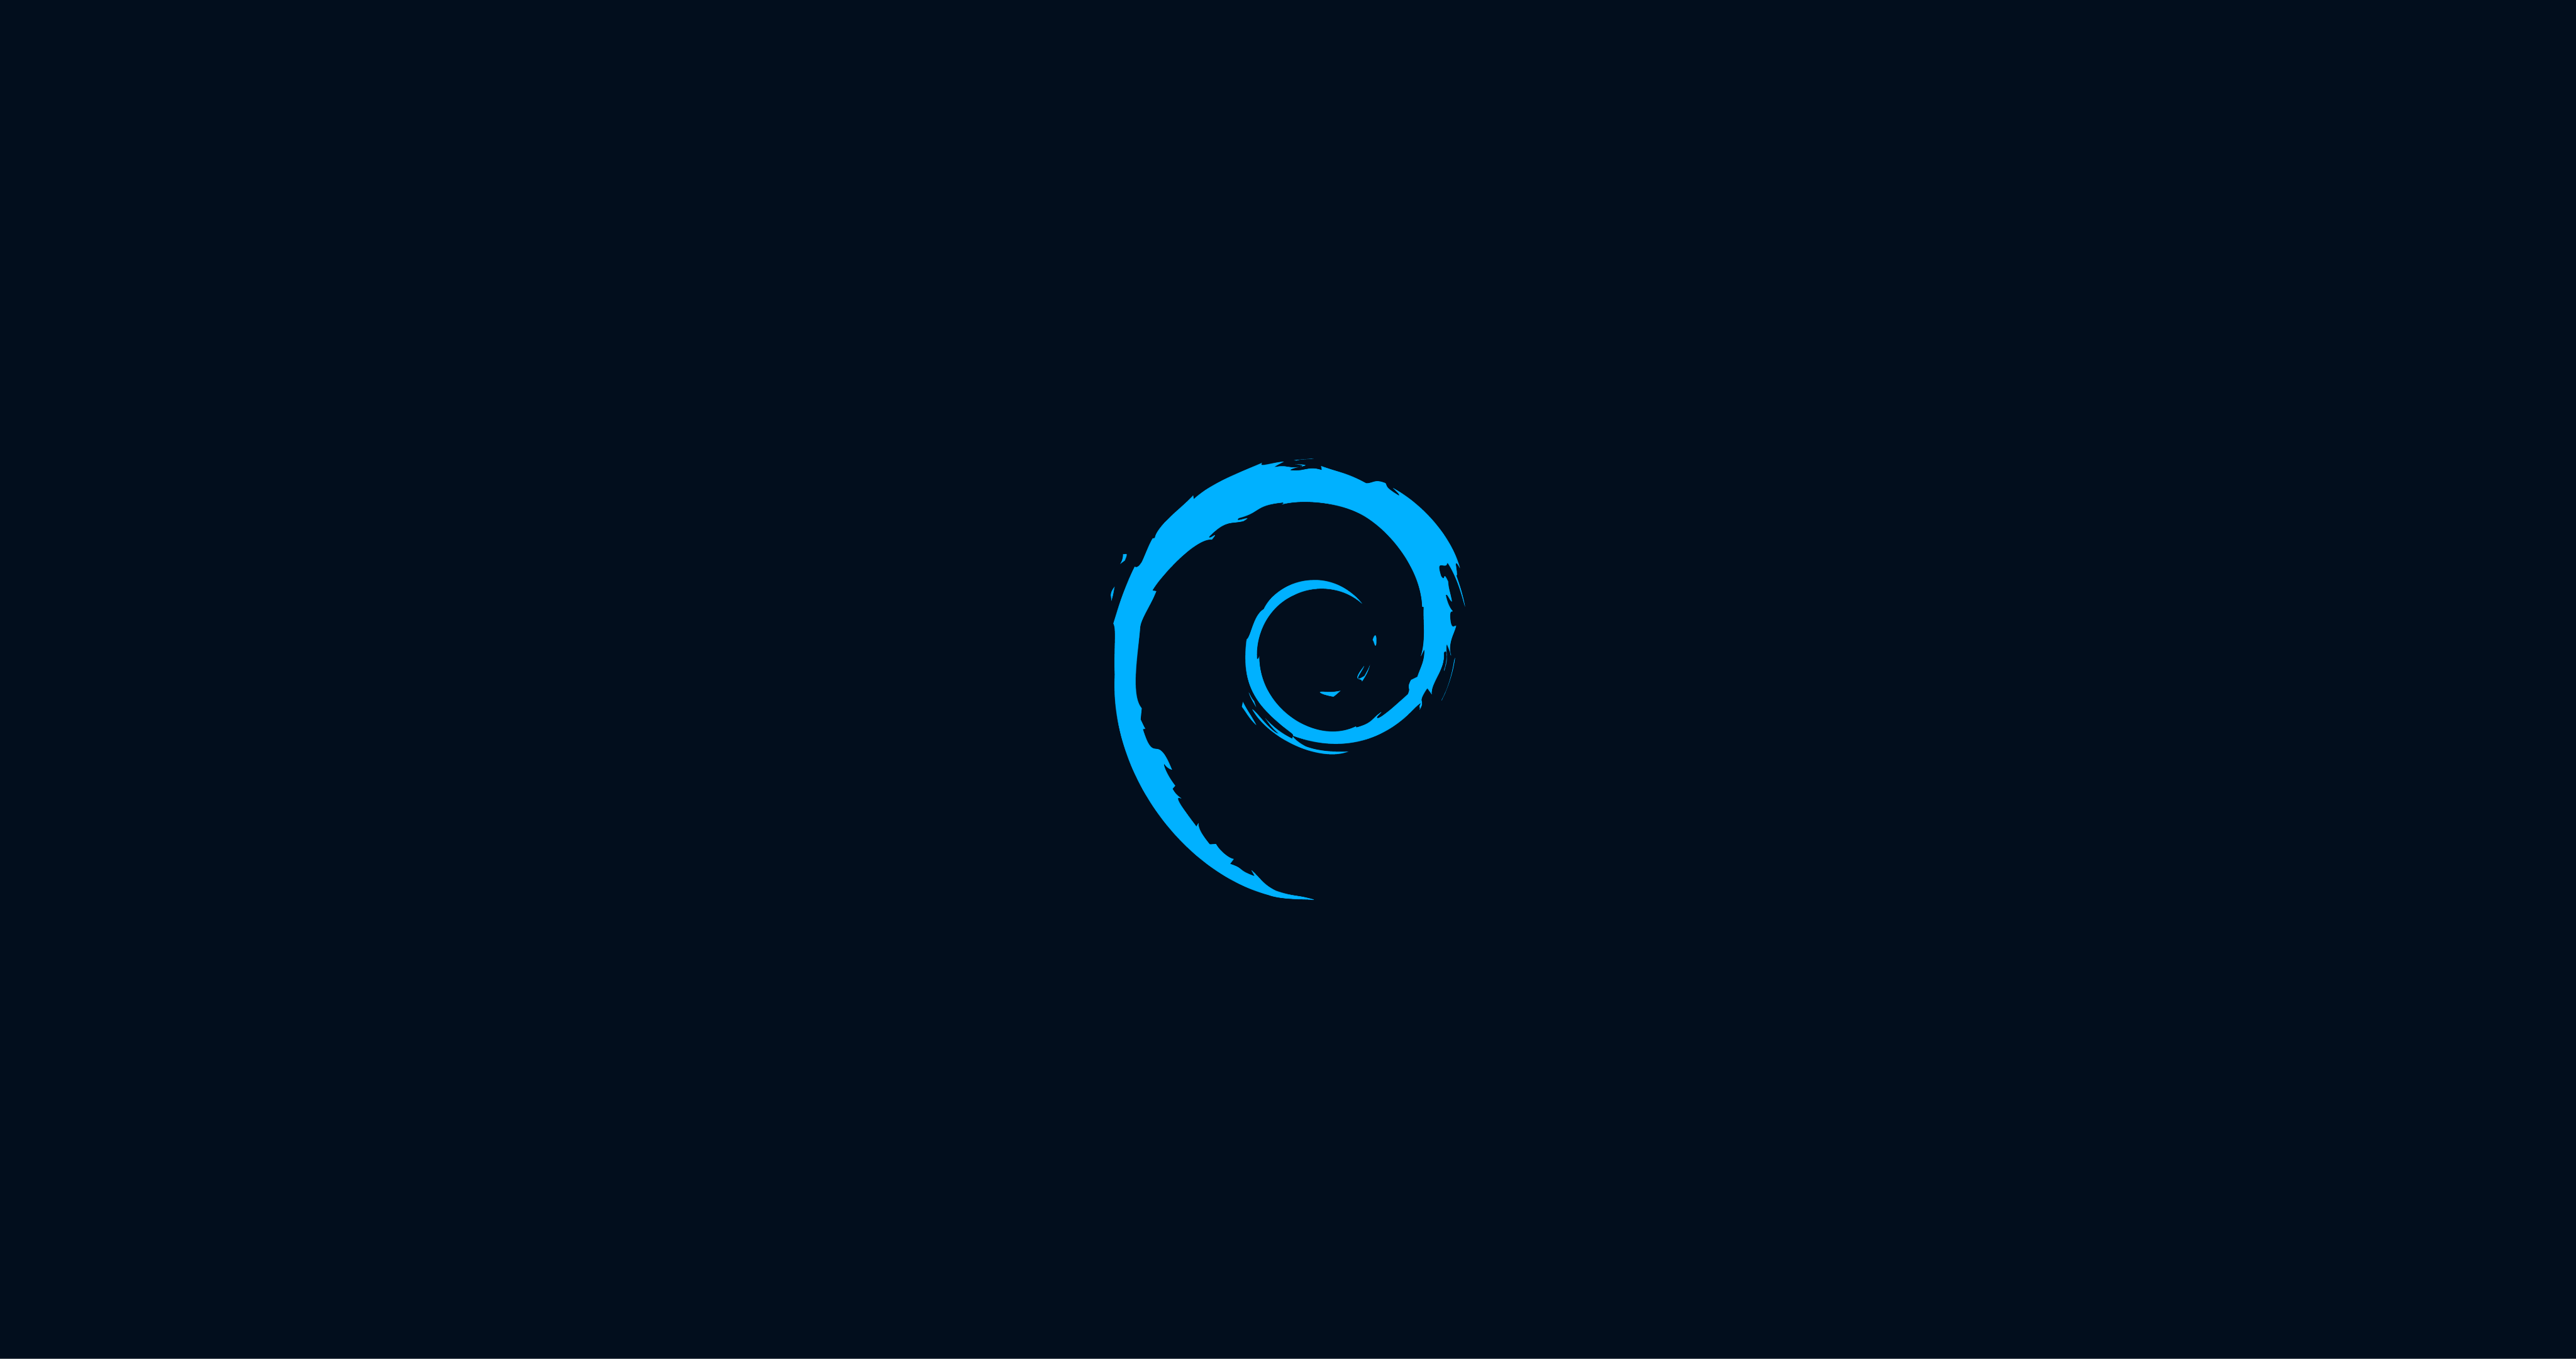 Debian Wallpapers HD Gallery [From Official Releases]